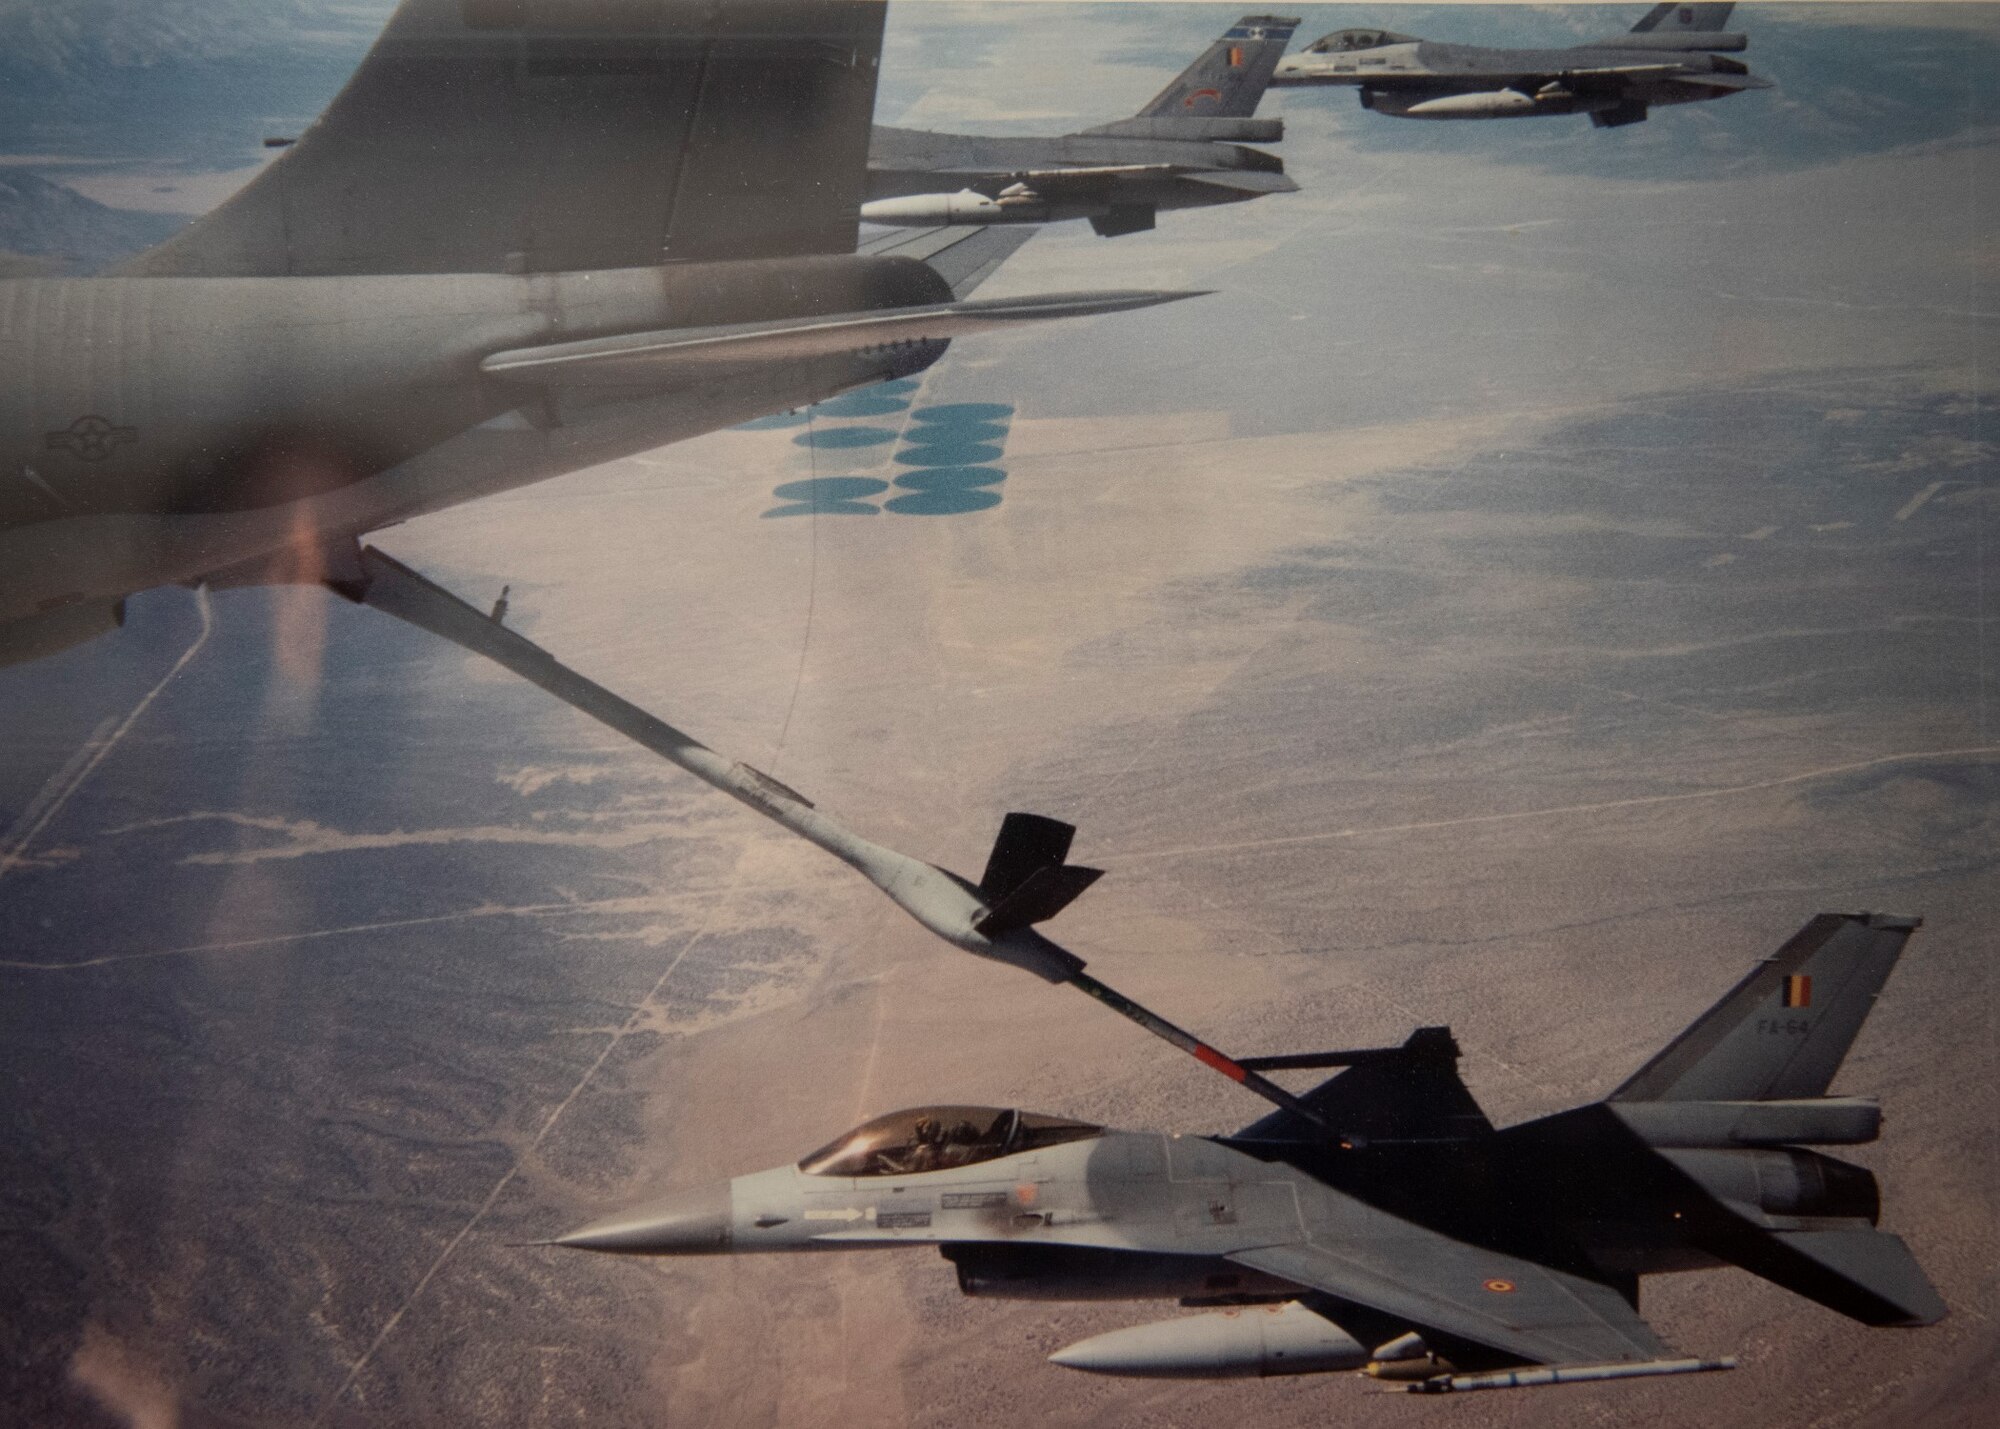 An F-16 gets refueled while flying in formation with two other F-16s.